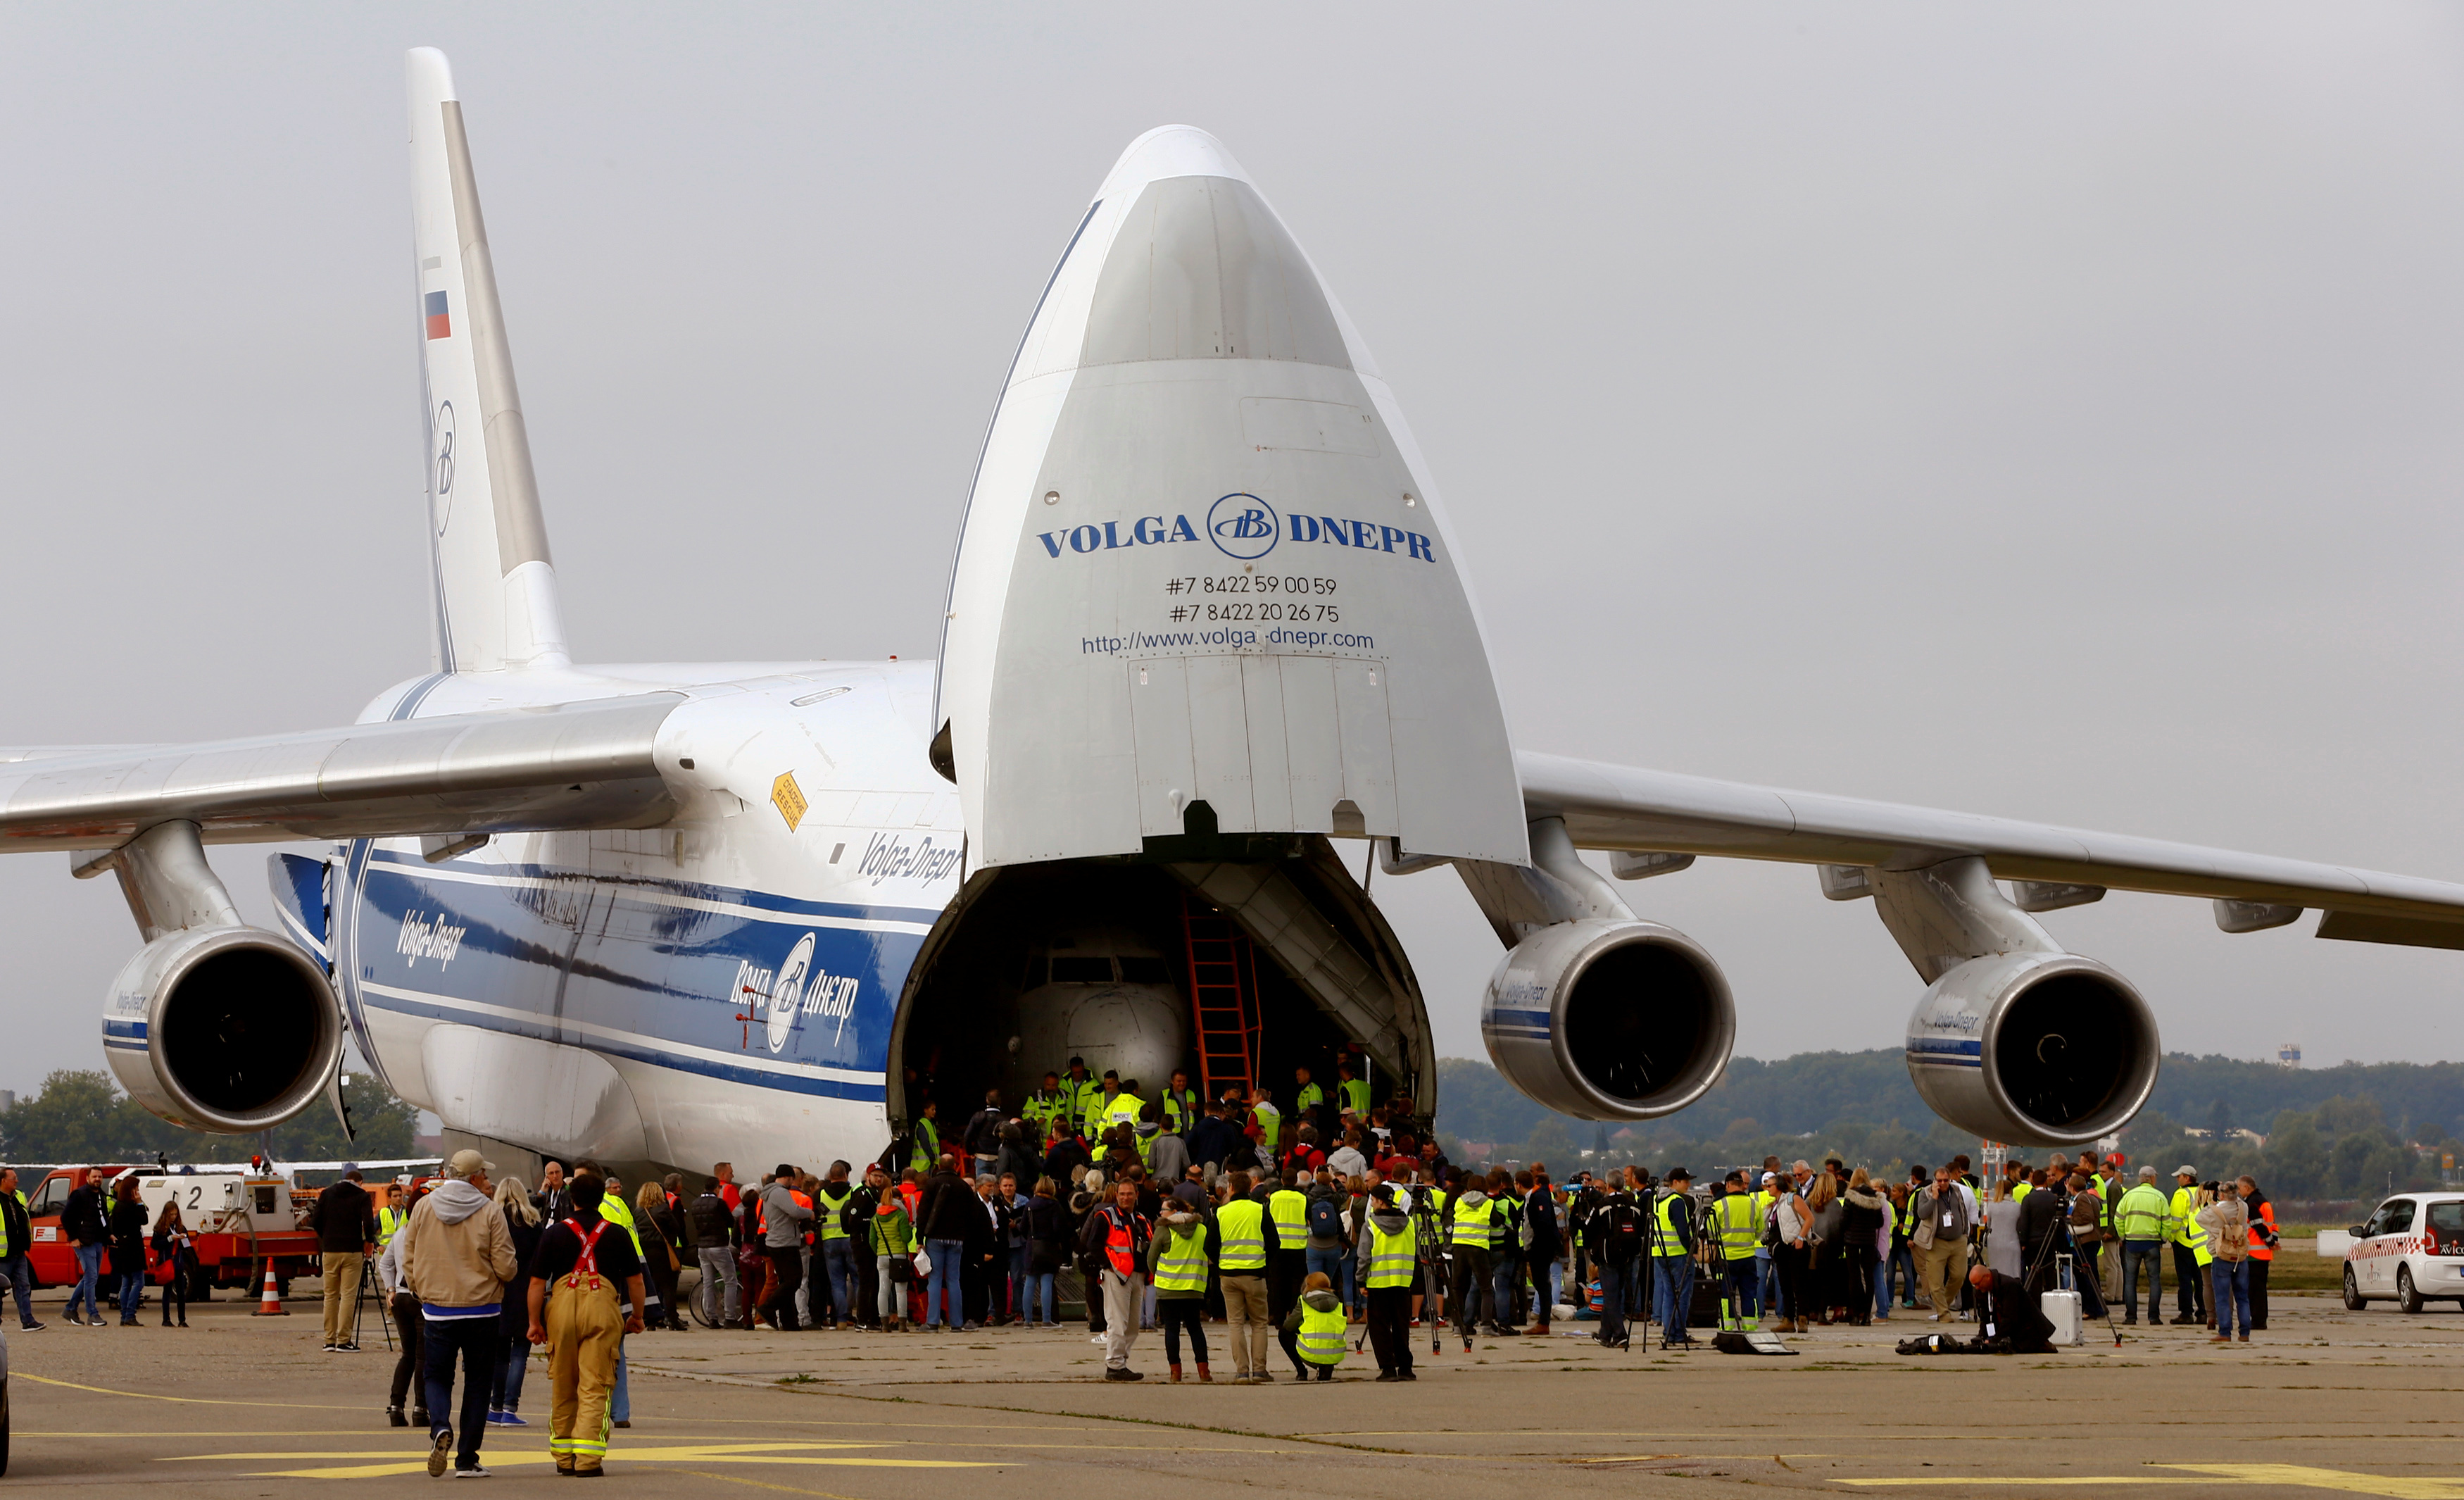 People stand in front of a Russian Volga-Dnepr Airlines Antonov An-124 aircraft transporting the fuselage of a Lufthansa Boeing 737-200, also known as Landshut, in Friedrichshafen